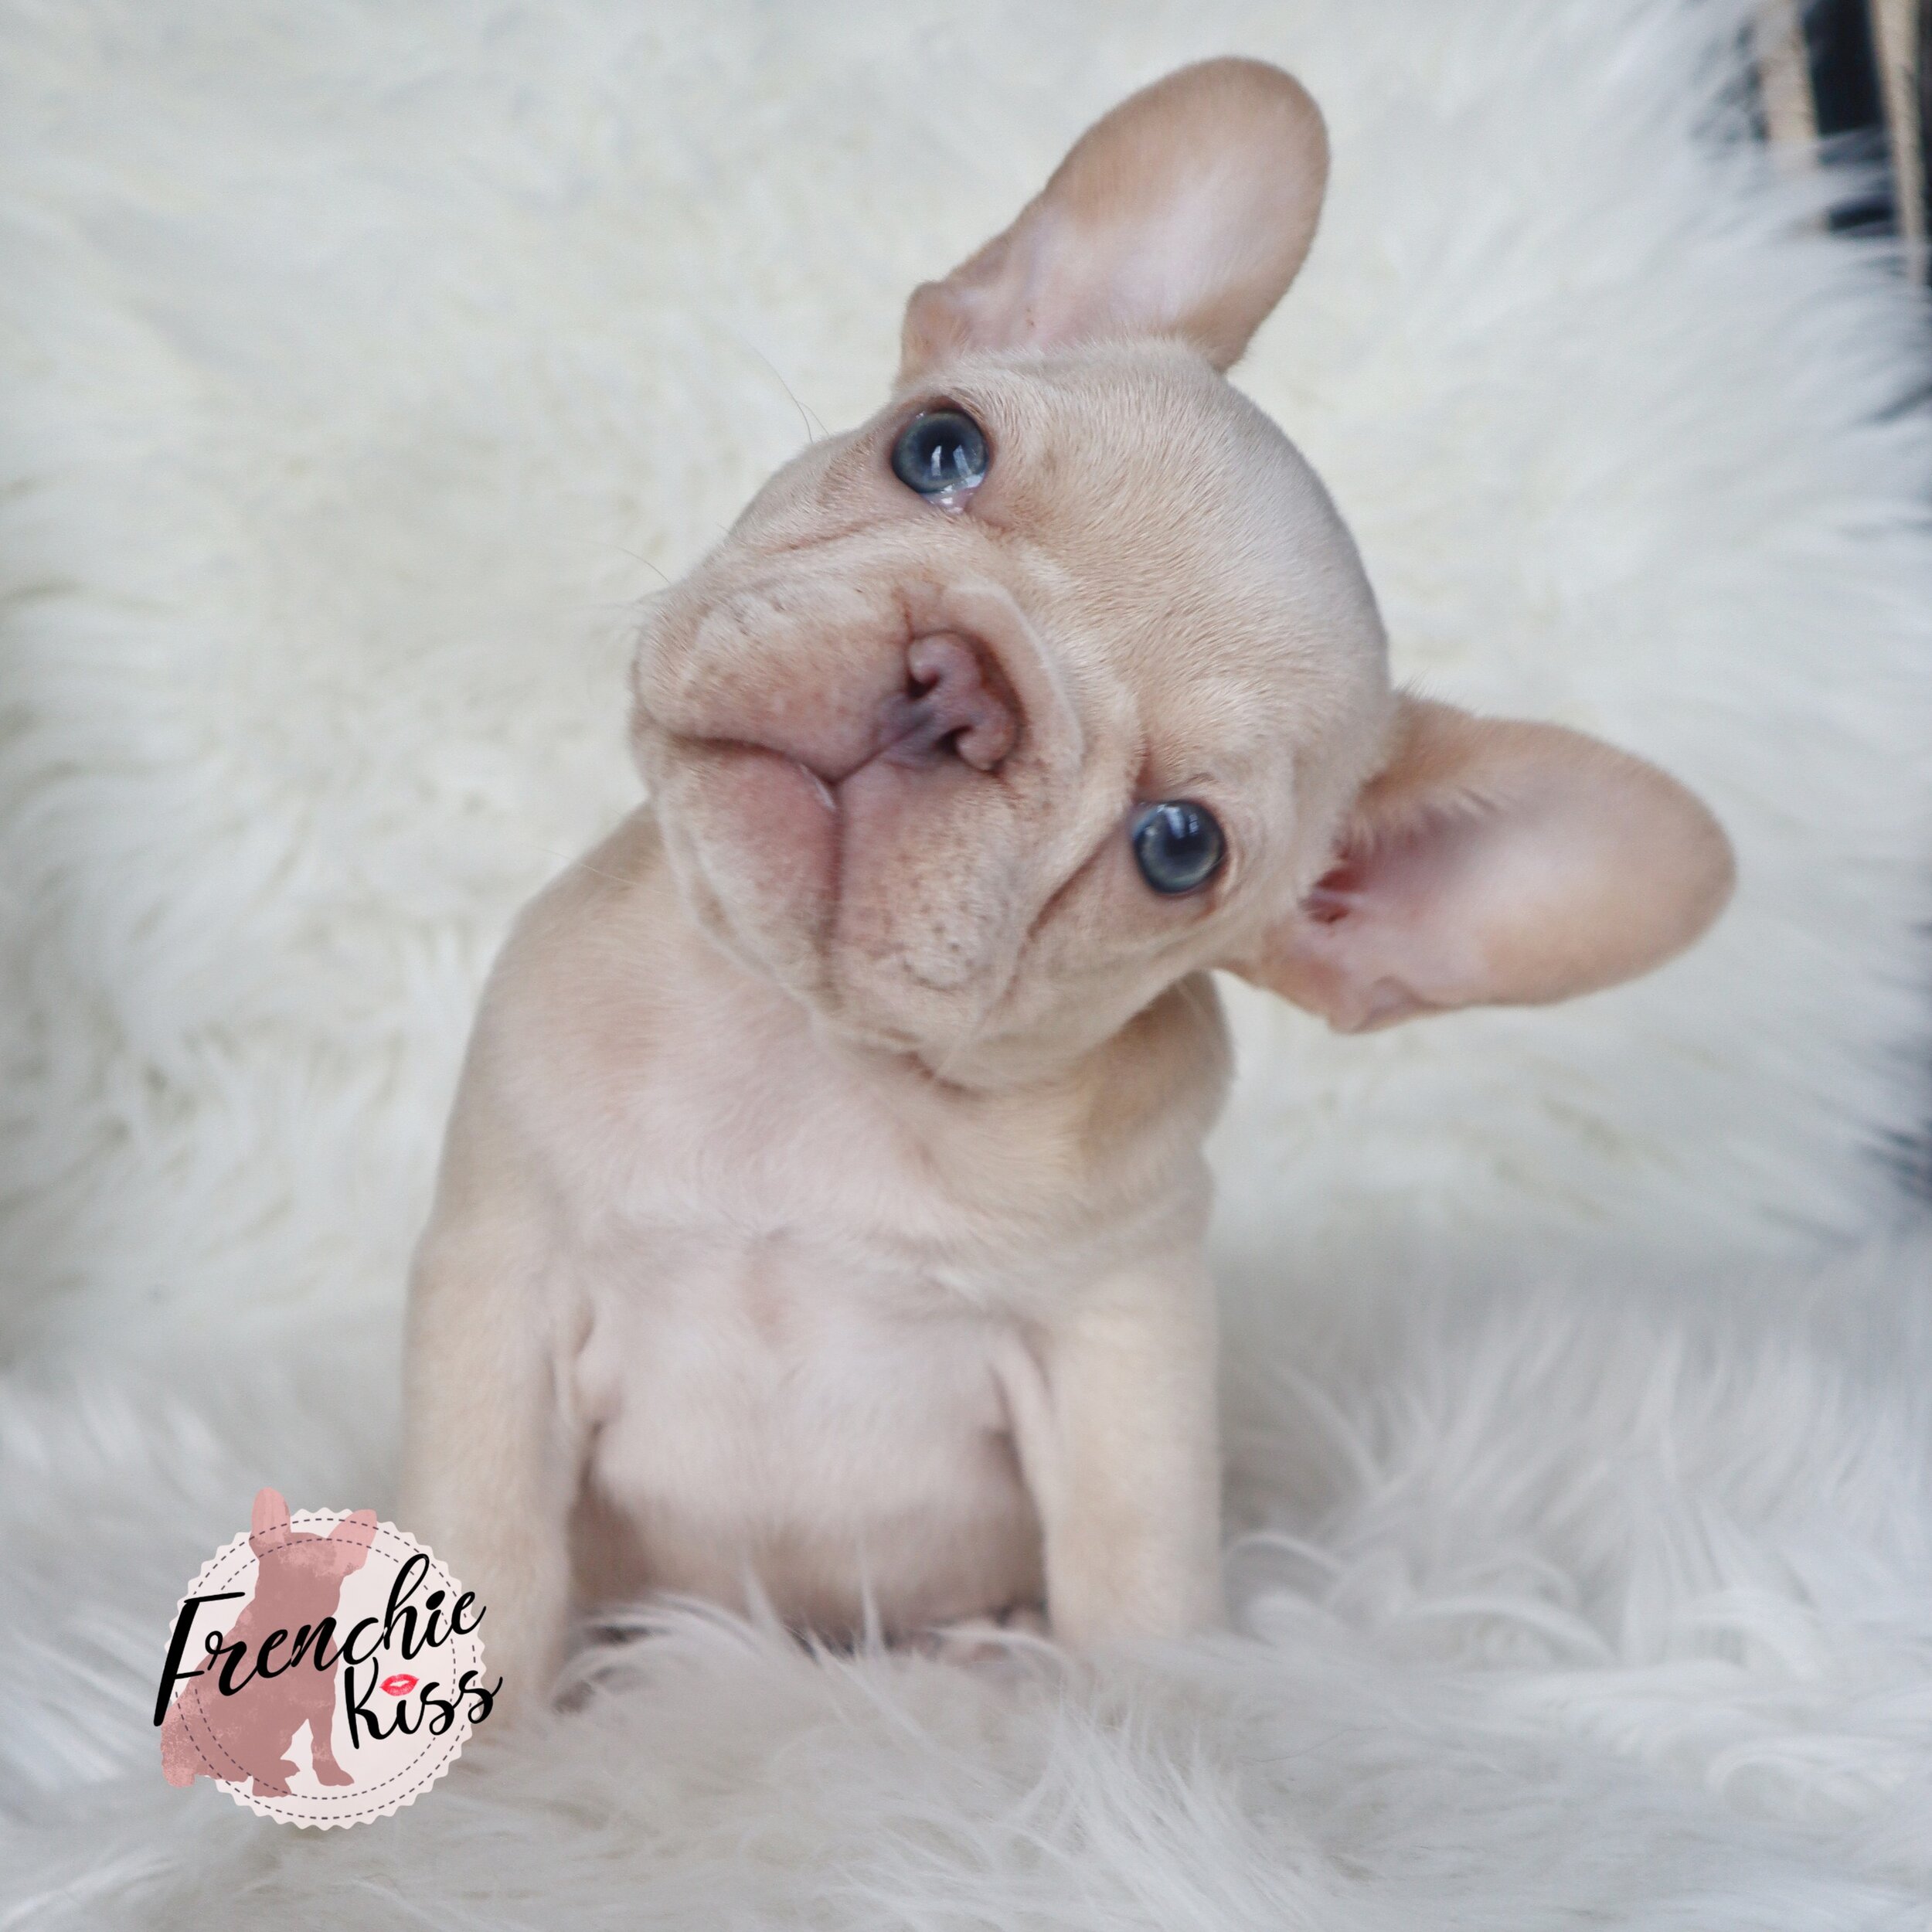 how much is a c section for a french bulldog?